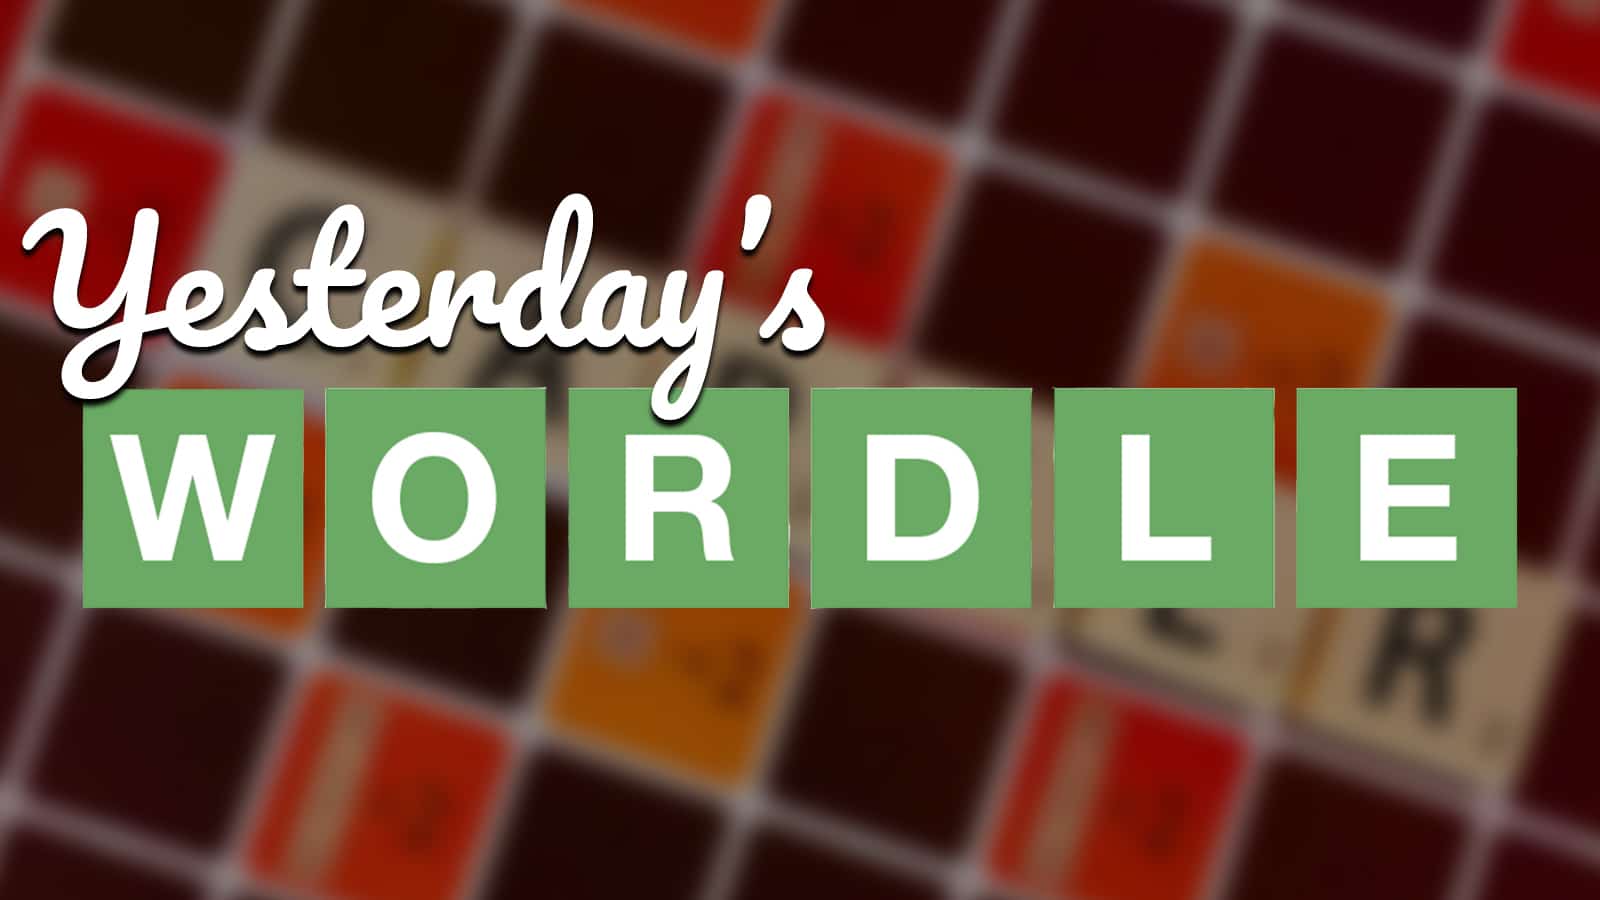 Yesterday's Wordle word (November 23): What was yesterday's Wordle answer?